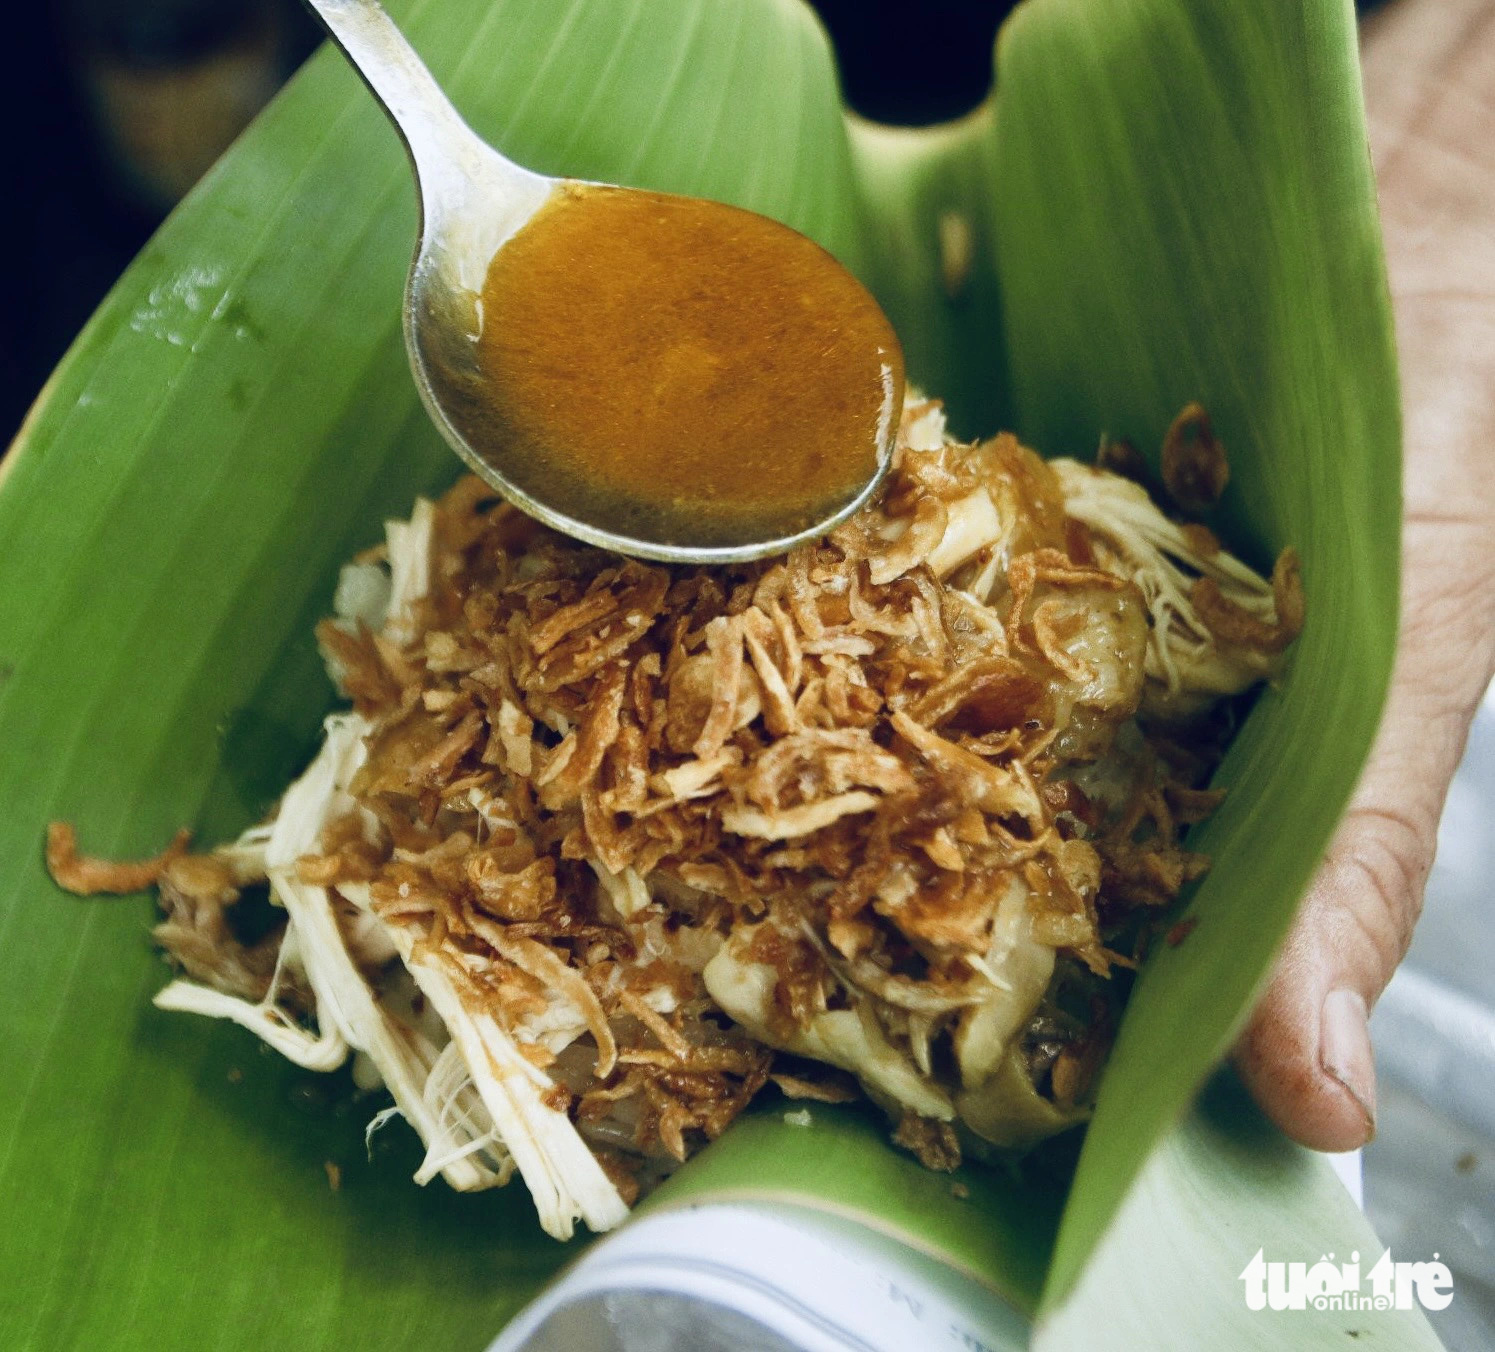 Steadfast vendor serves chicken sticky rice on Ho Chi Minh City sidewalk for 36 years